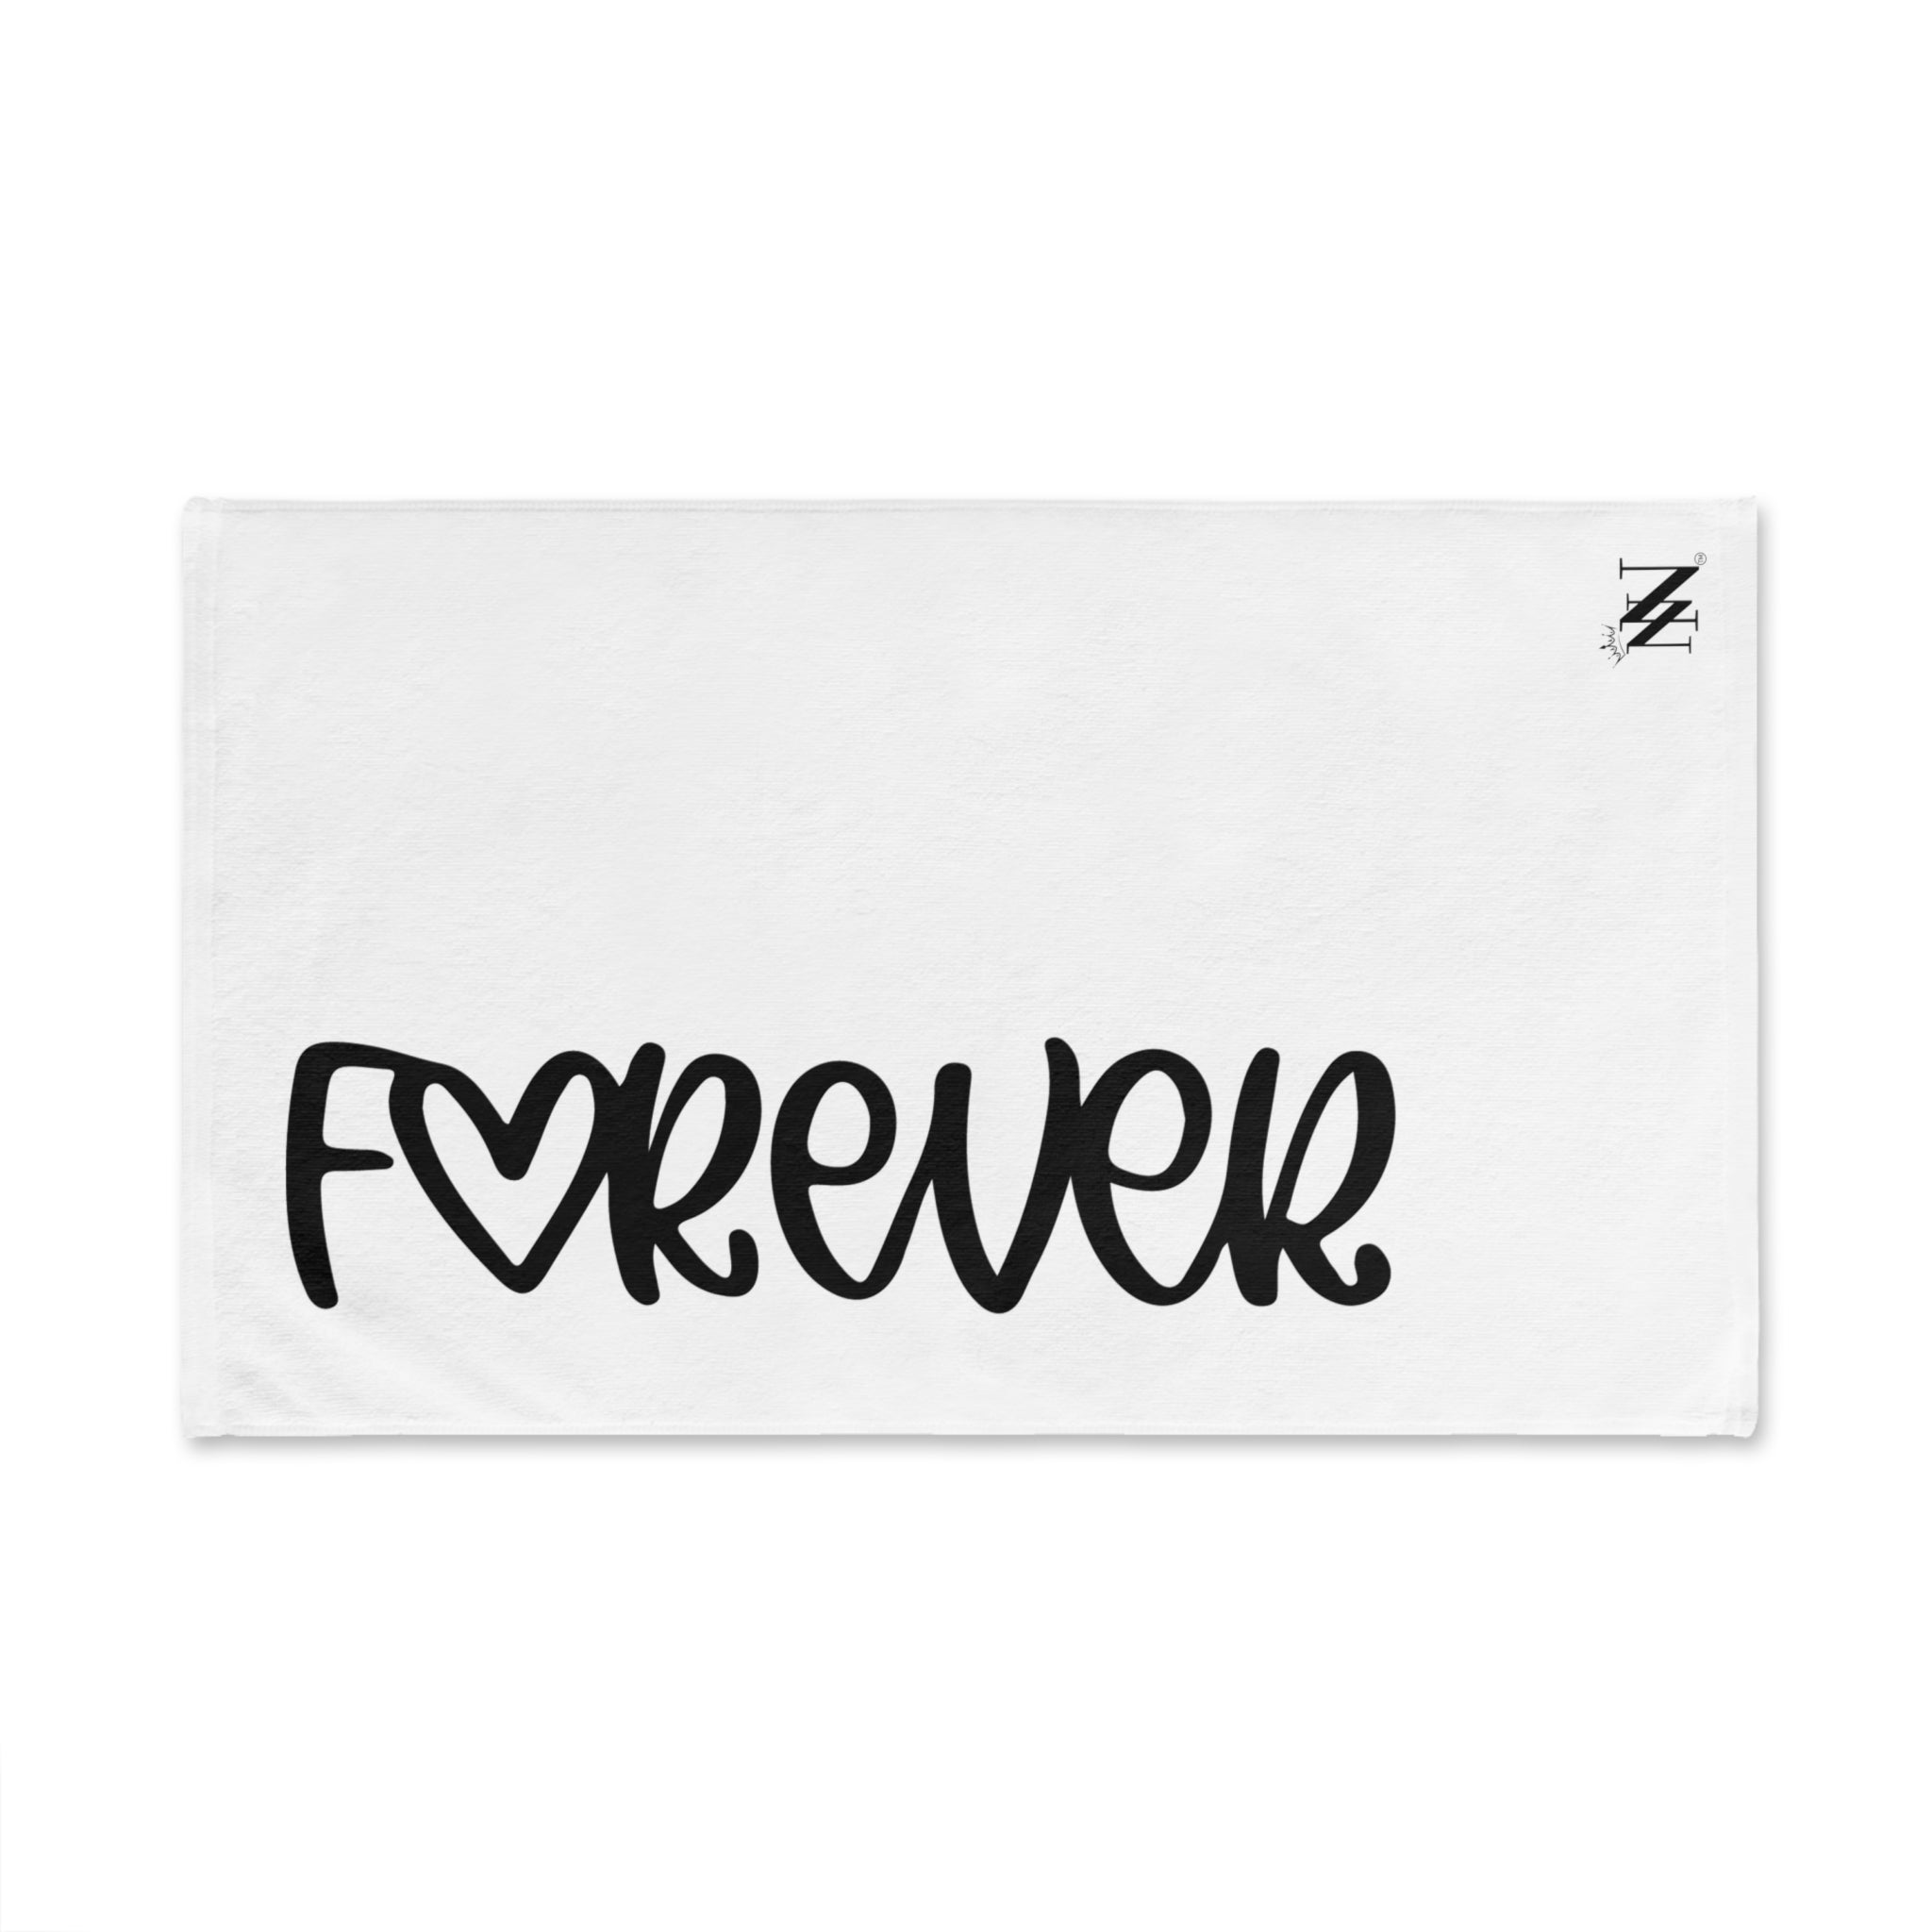 Forever | Nectar Napkins Fun-Flirty Lovers' After Sex Towels NECTAR NAPKINS